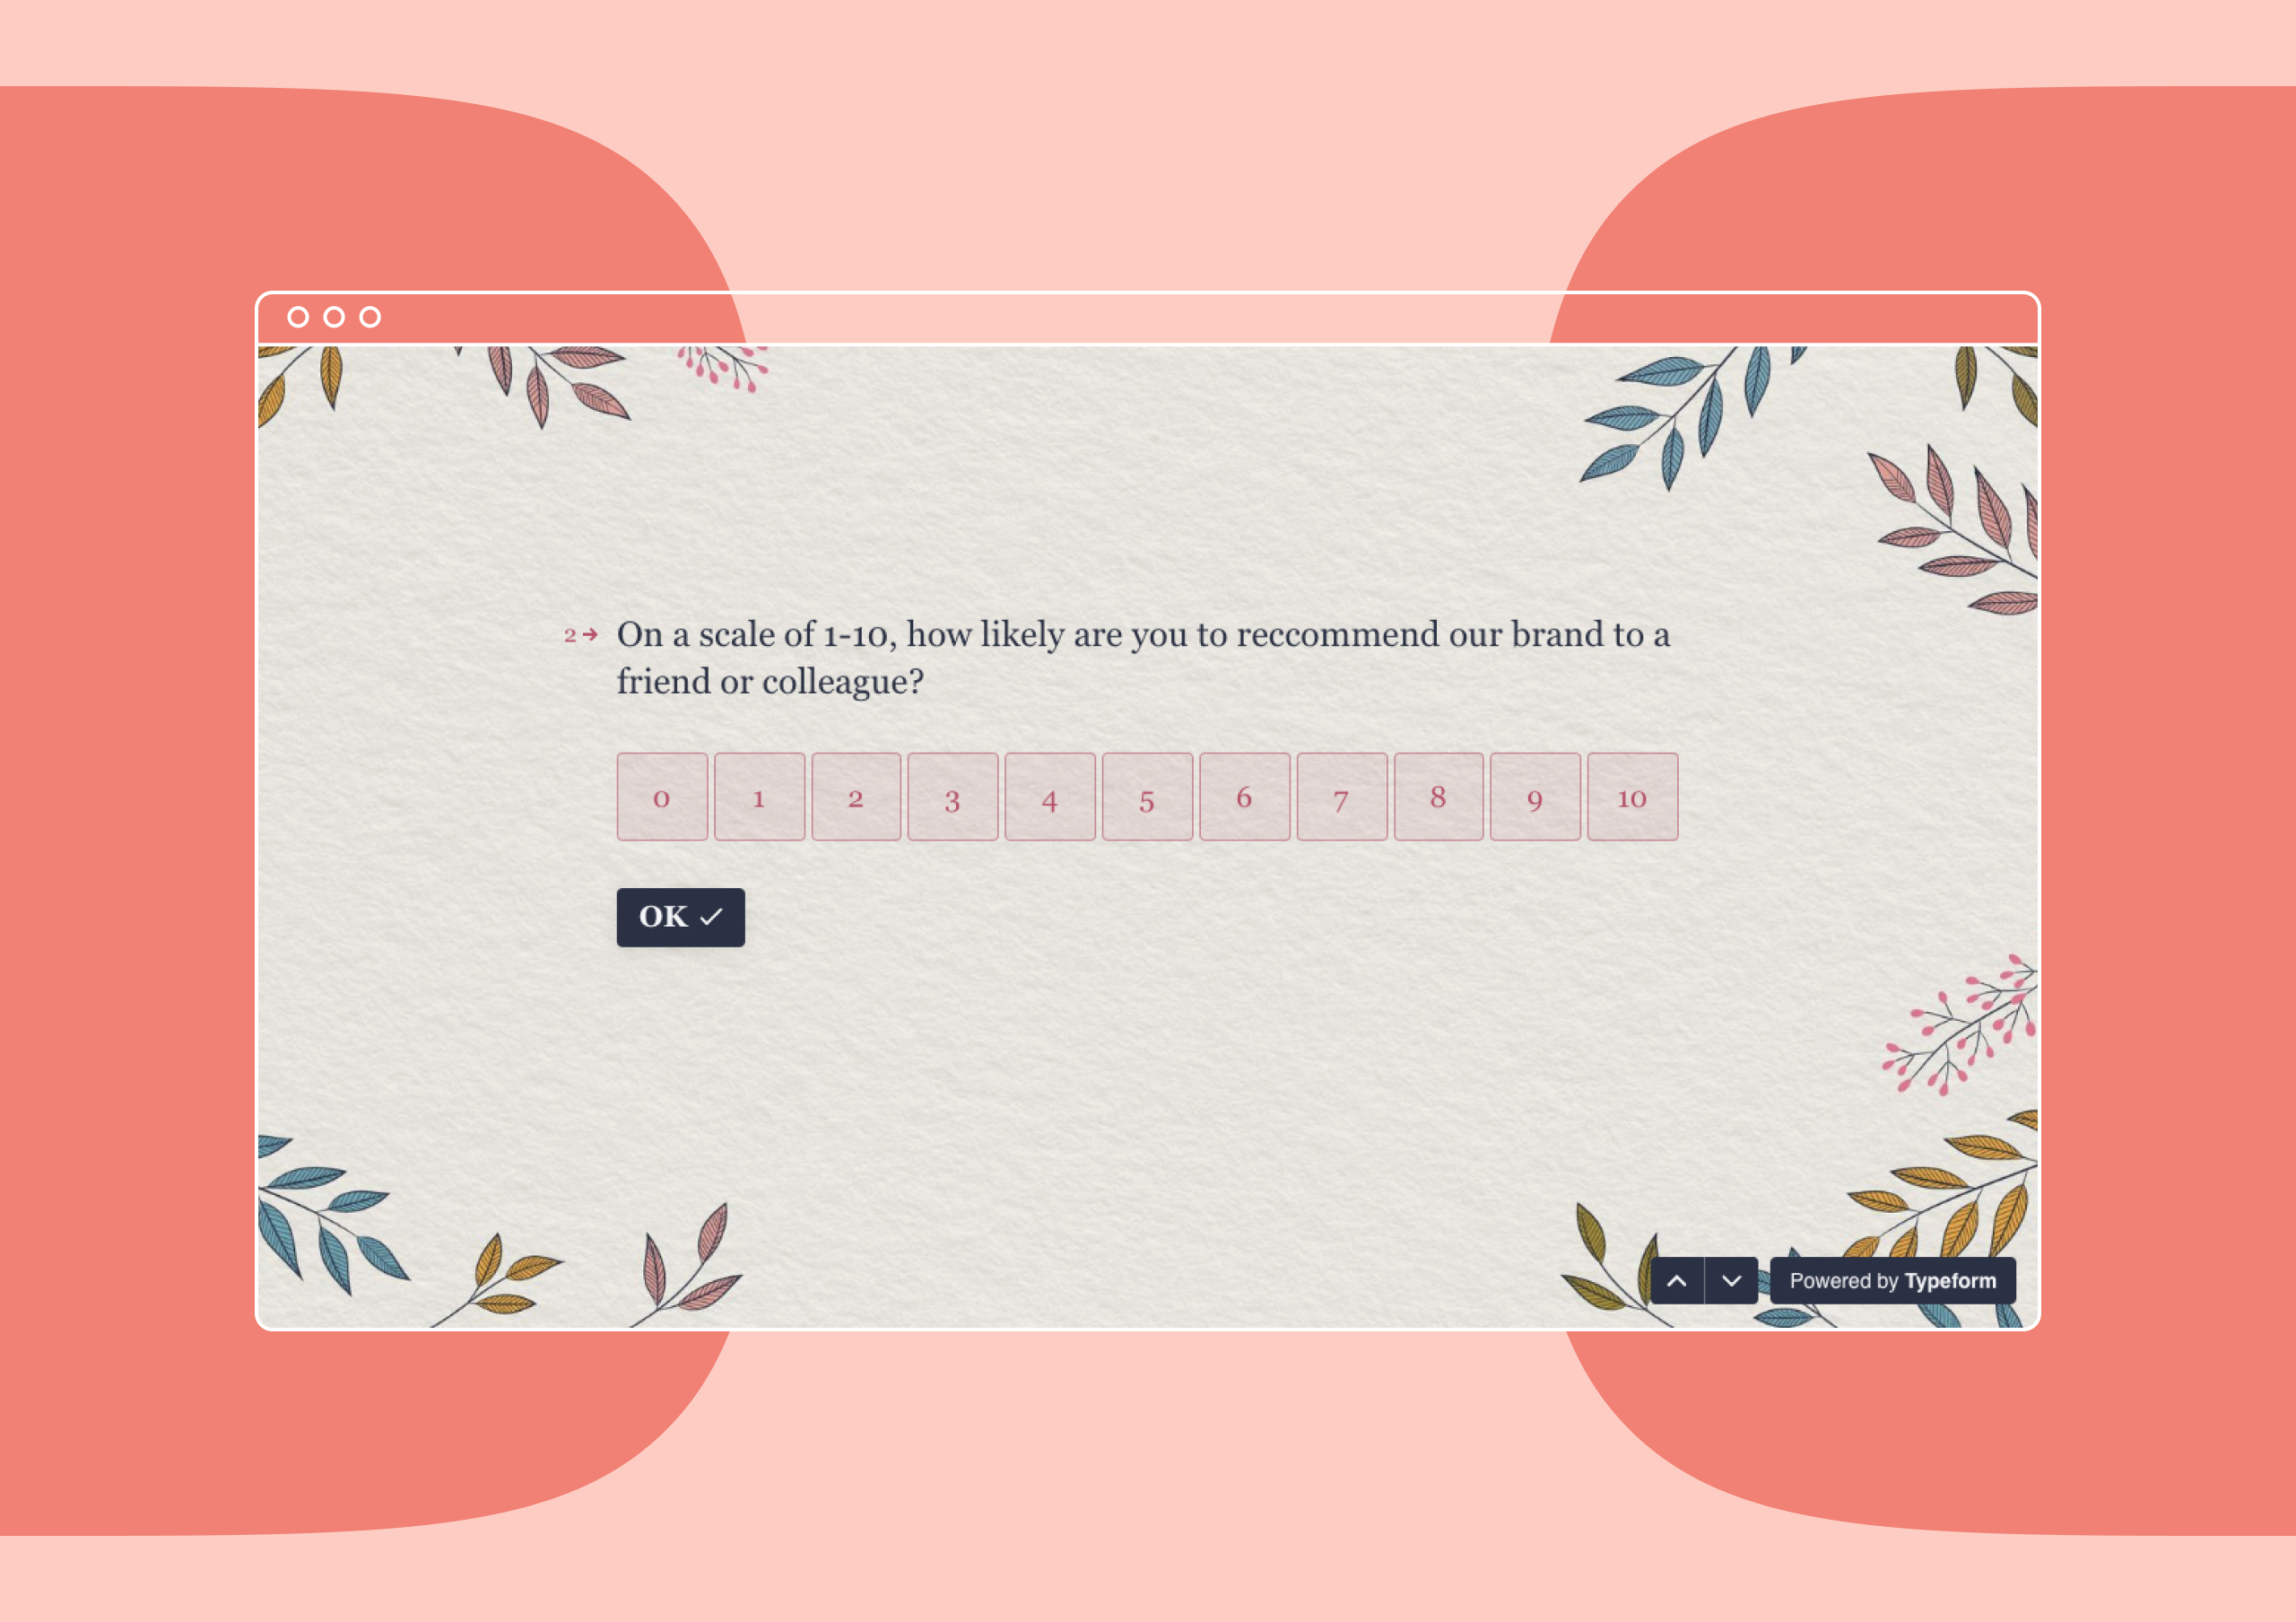 Screenshot of stylized survey question asking how likely you are to recommend a brand to a friend or colleague. 